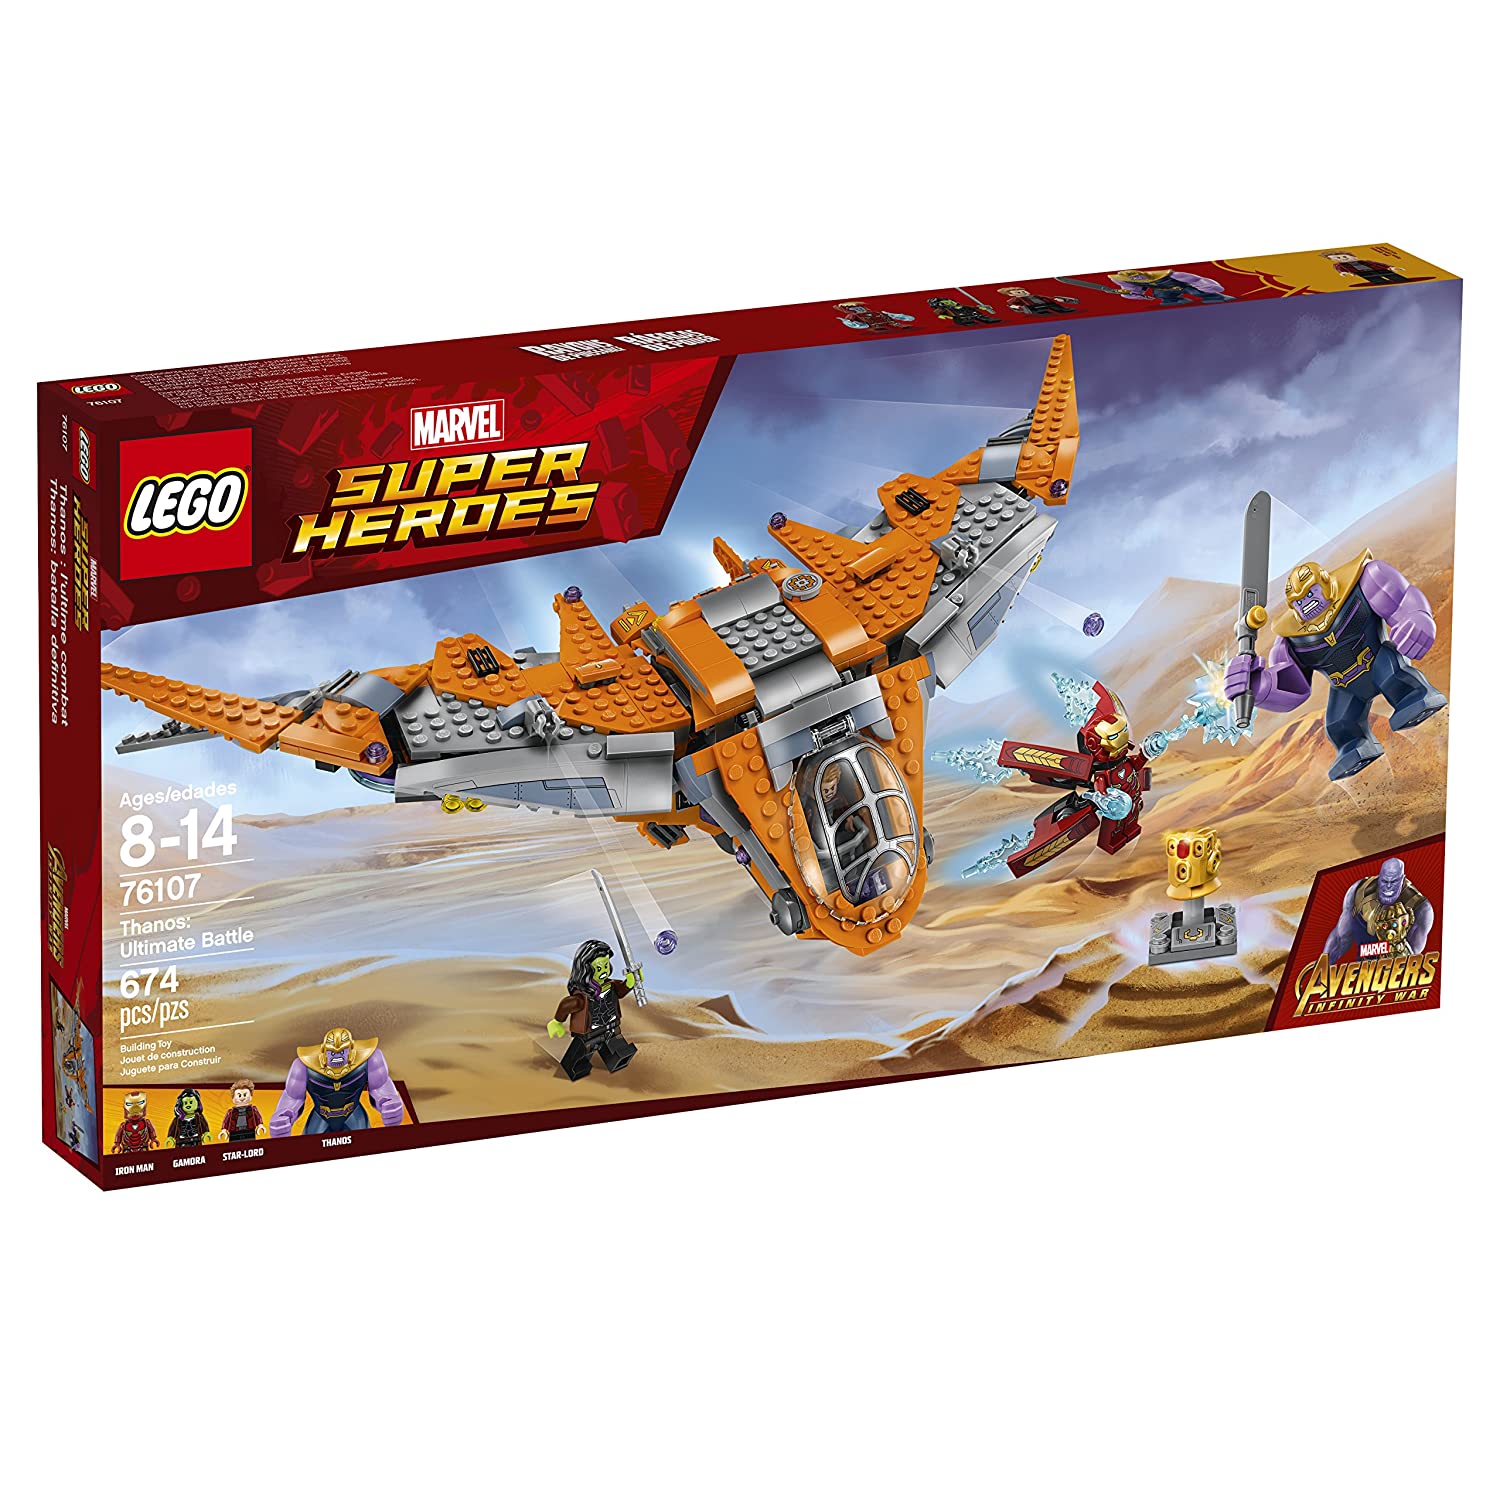 Top 9 Best LEGO Avengers Infinity War Sets Reviews in 2022 1